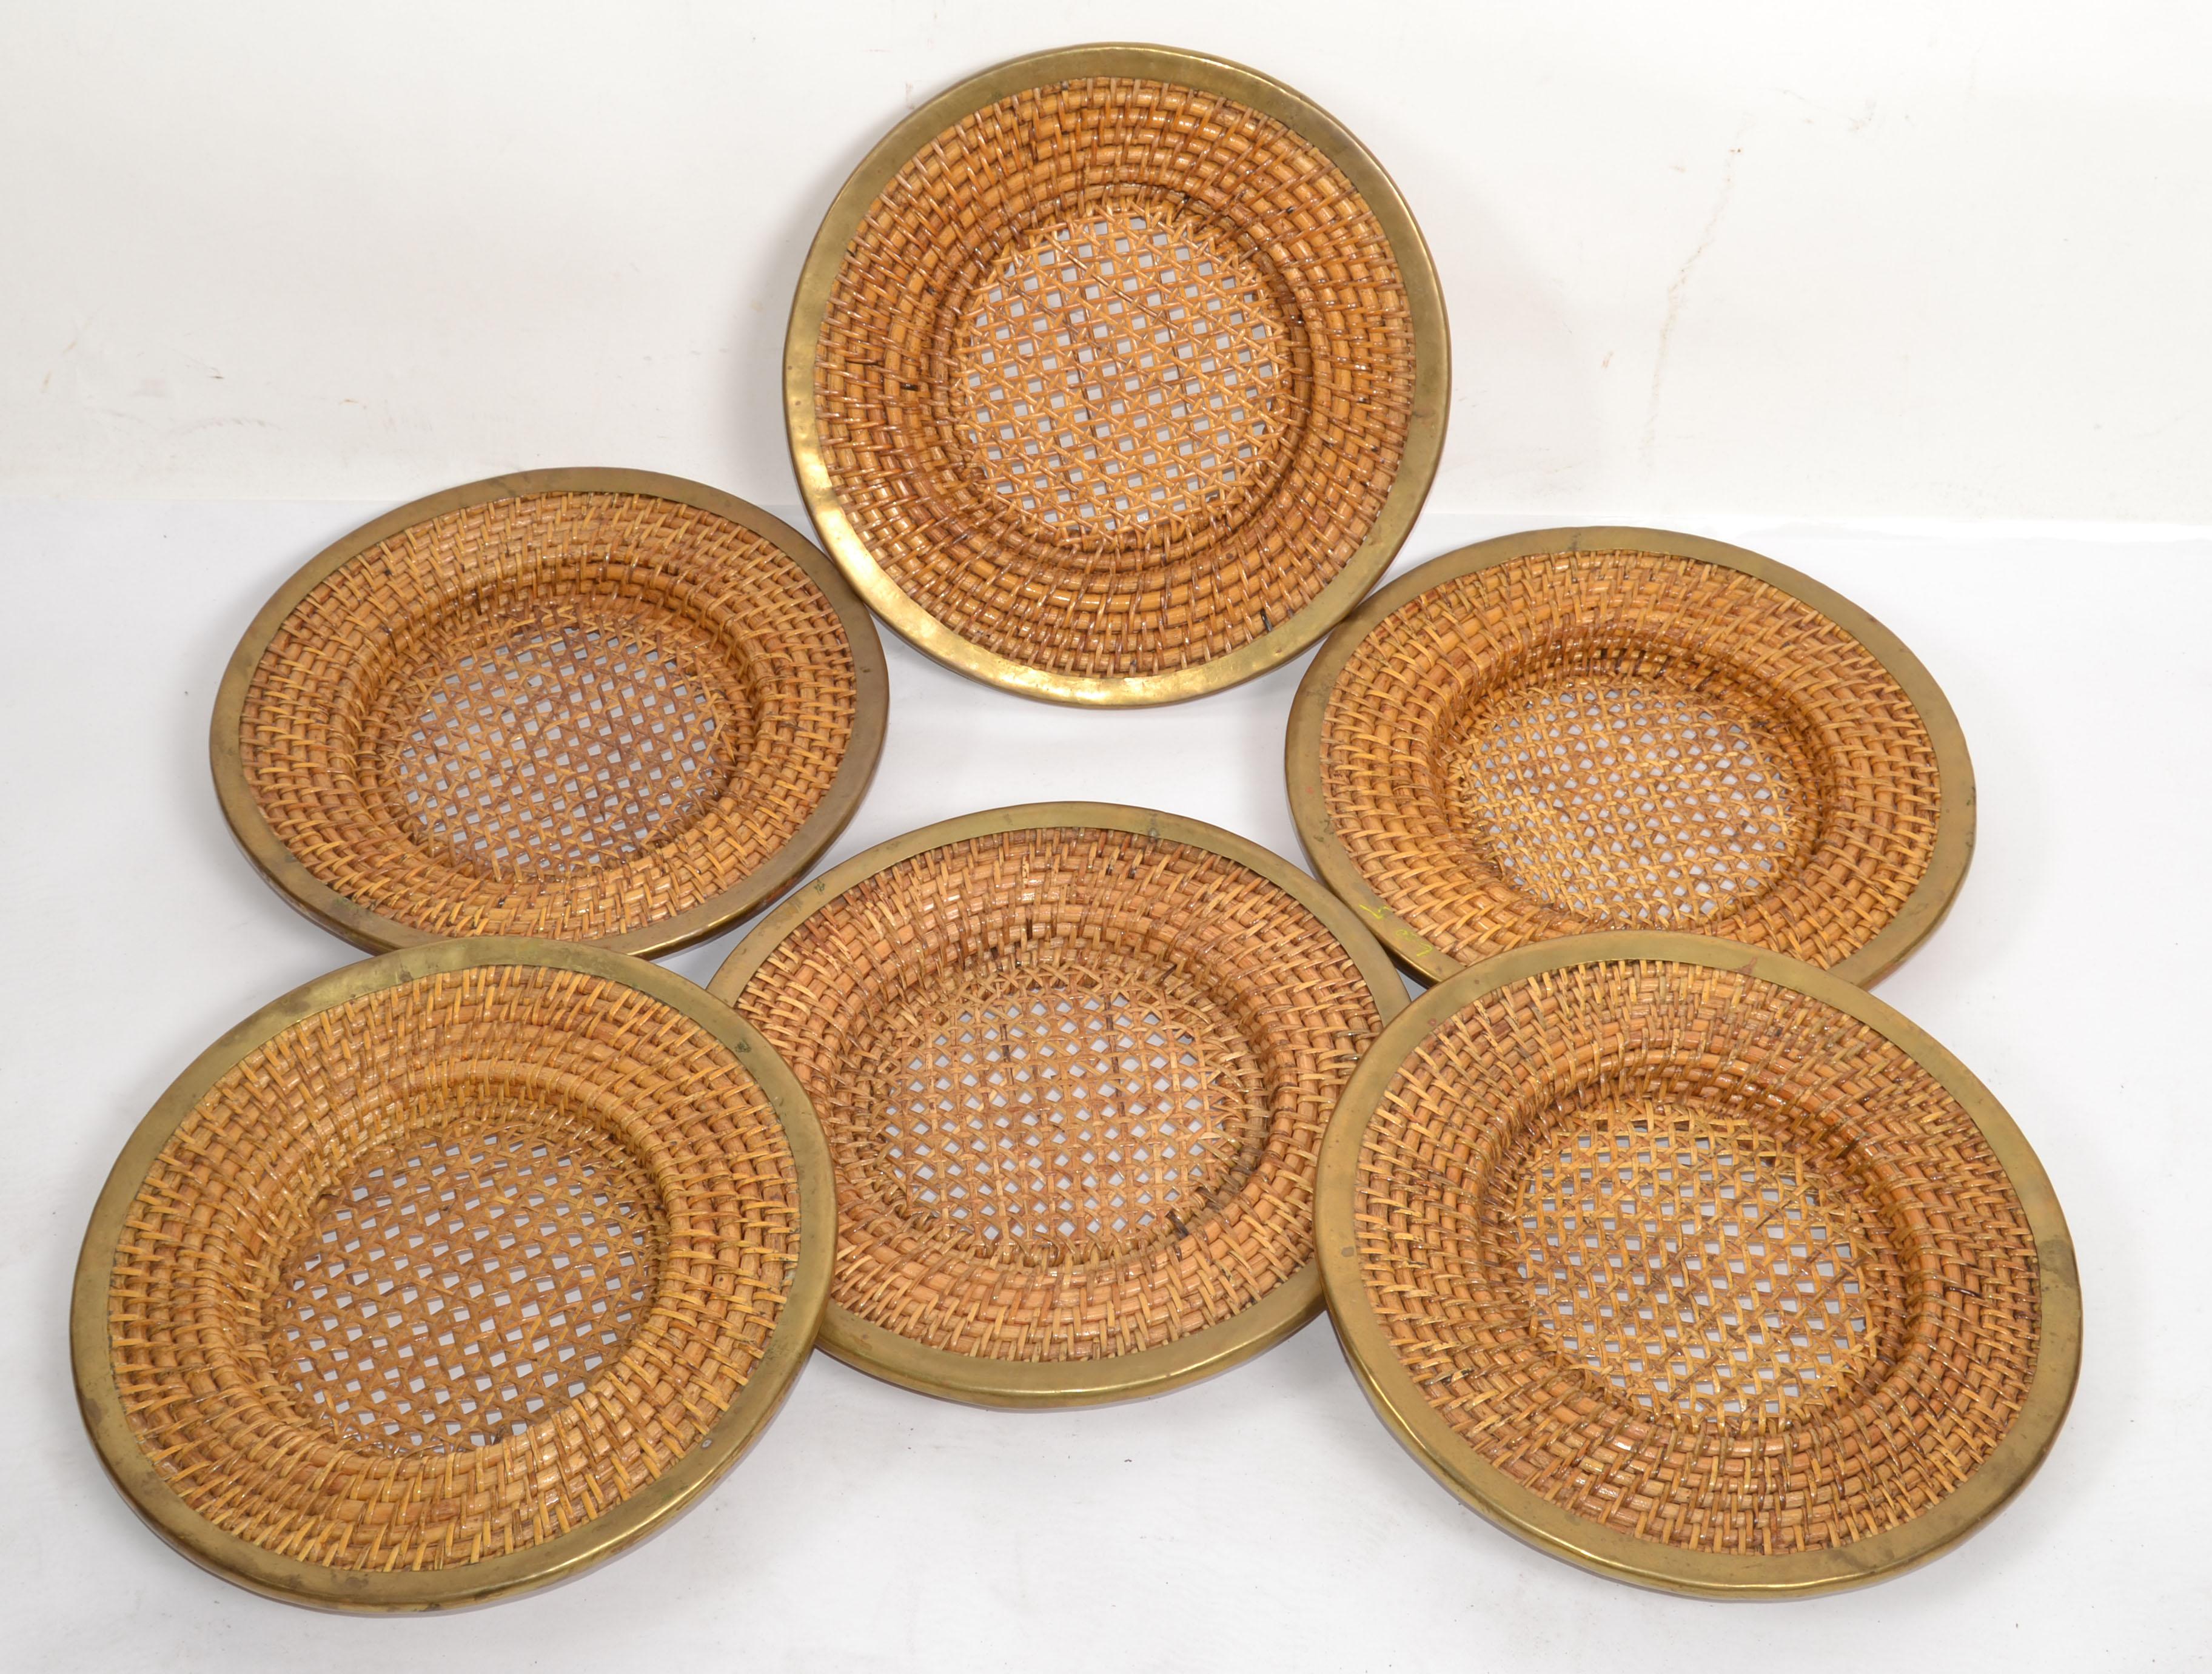 Set of 6 Bohemian Chic Mid-Century Modern Round Handwoven Rattan, Wicker, Cane with Brass Detail Place Sets, Dinner Plates, Serveware.
Cane detail in the center. Brass has aged to a warm patina due to History and the edging shows some dings and